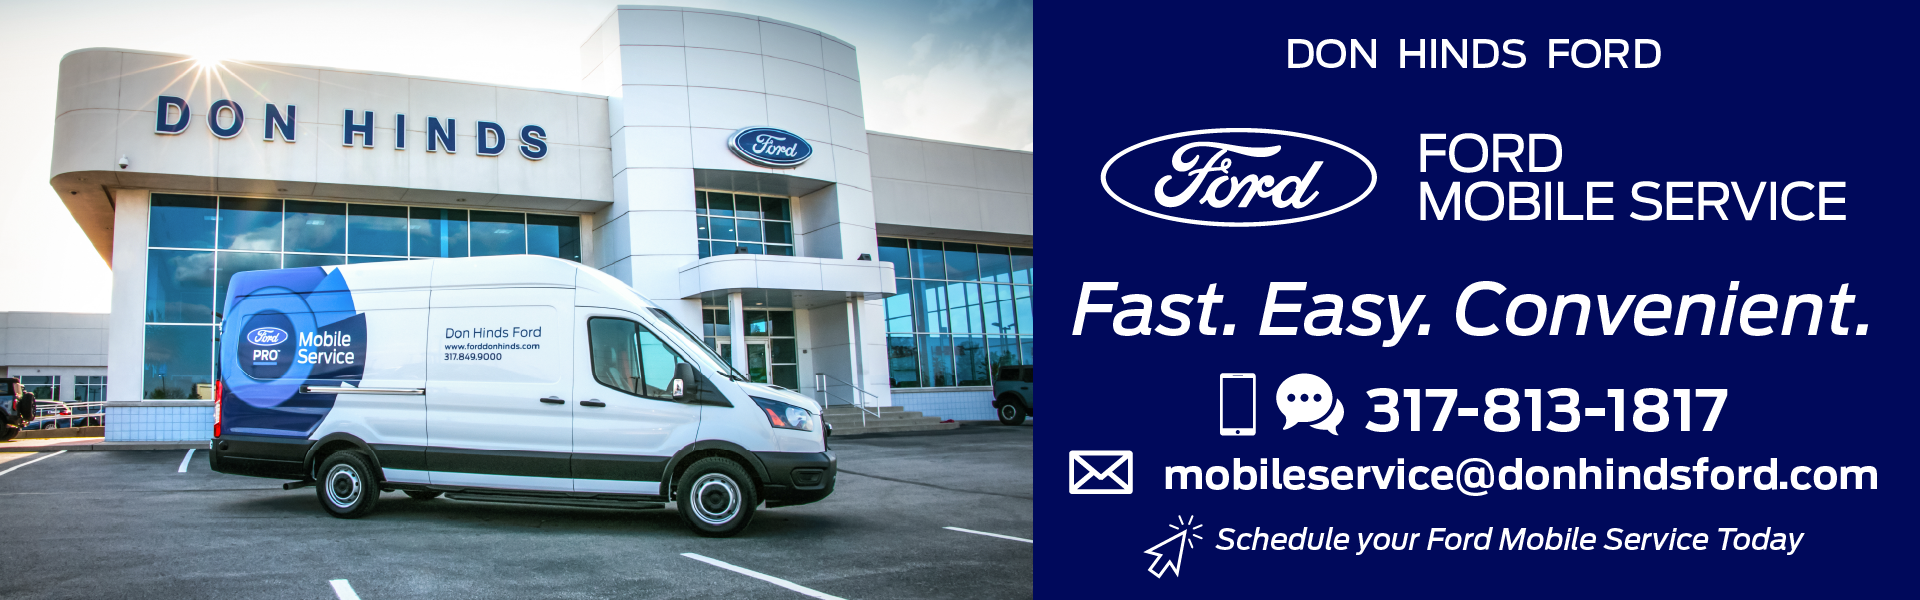 Ford Mobile Service banner Don Hinds Ford